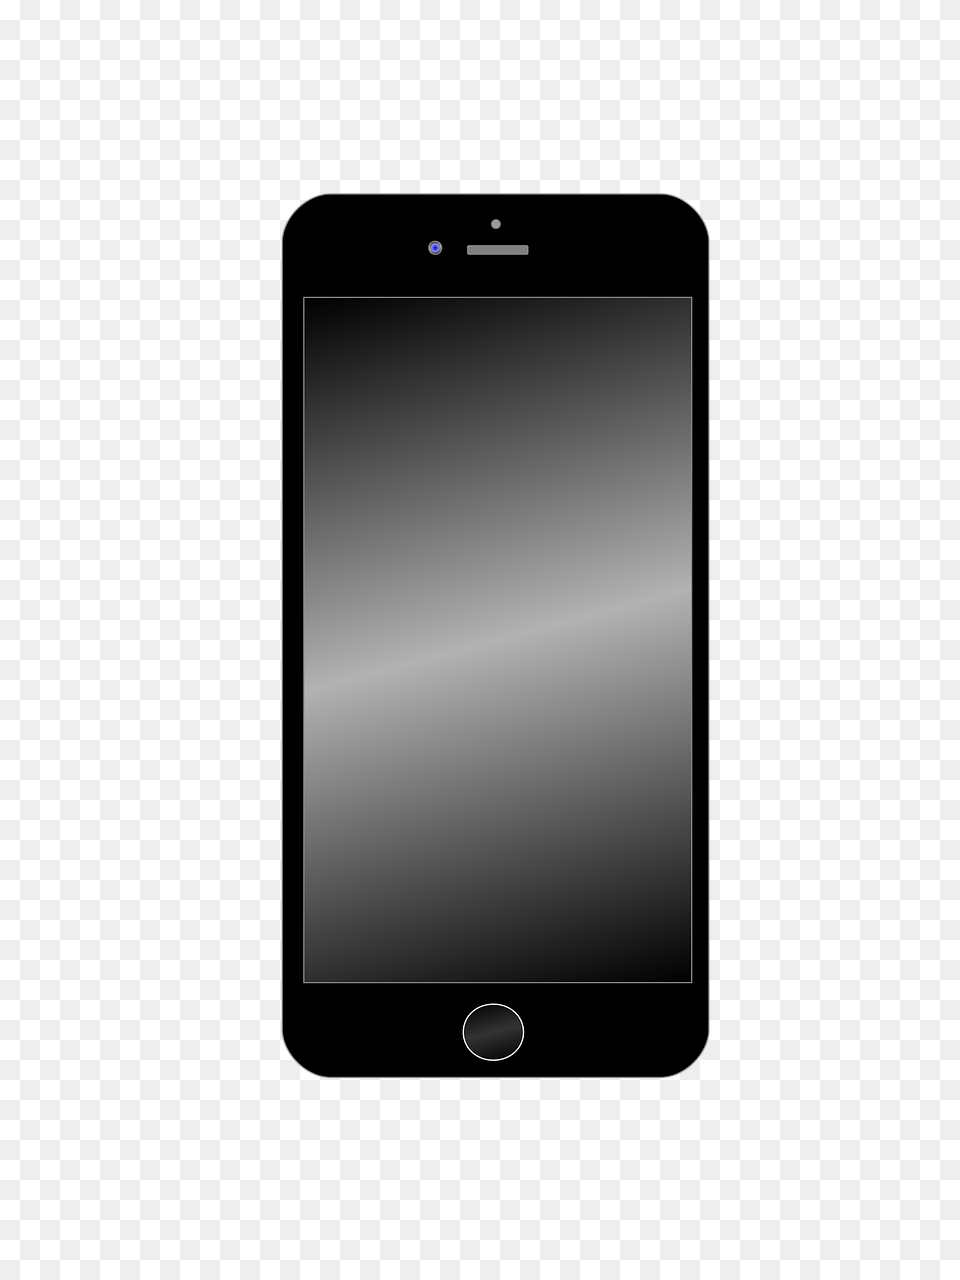 Smartphone Iphone Iphone, Electronics, Mobile Phone, Phone Png